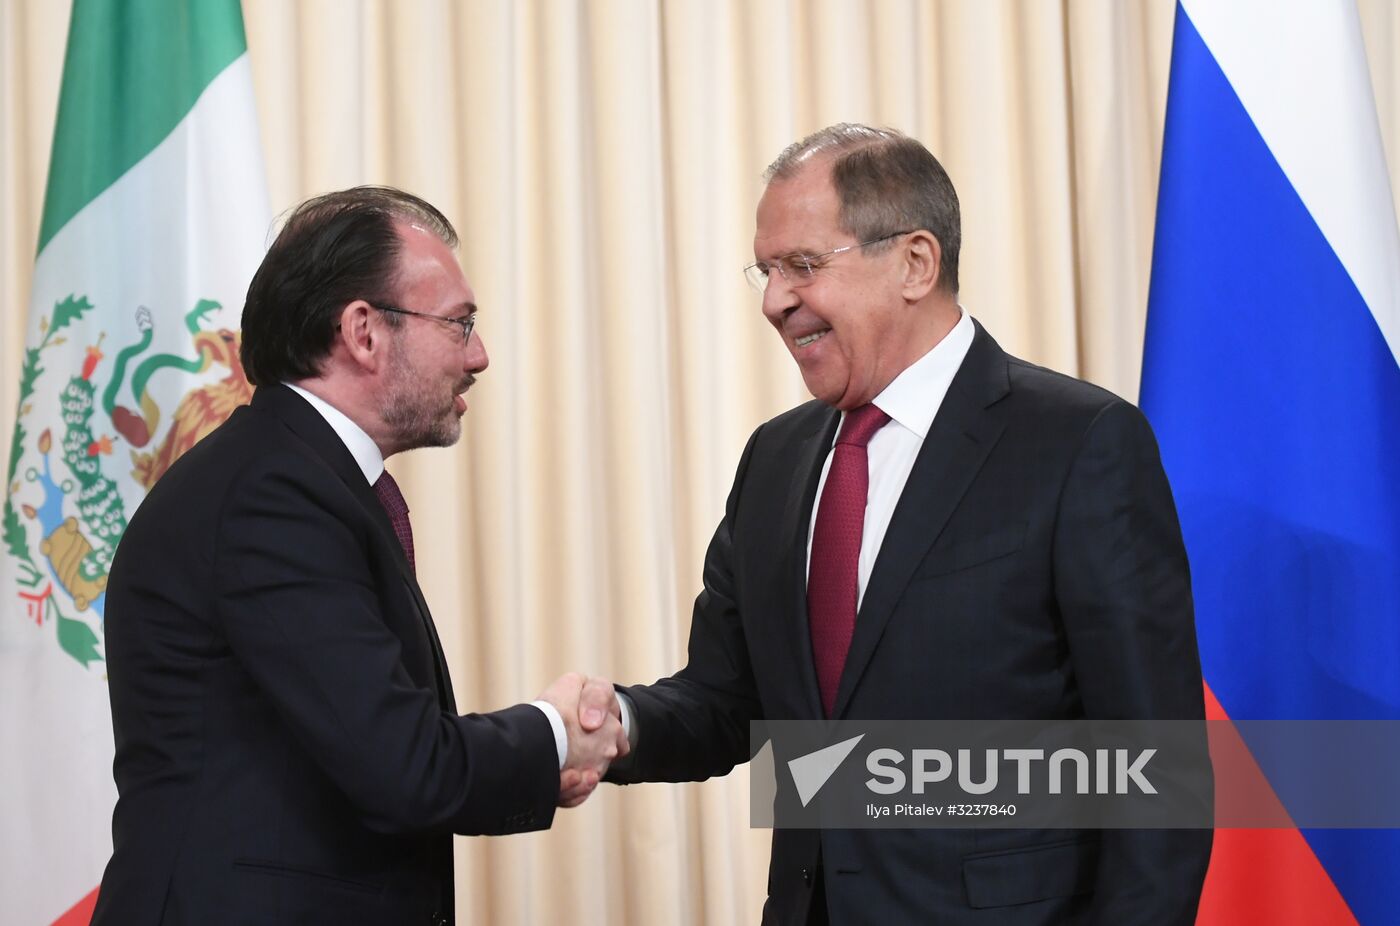 Foreign Minister Sergei Lavrov meets with Mexican counterpart, Dr. Luis Videgaray Caso